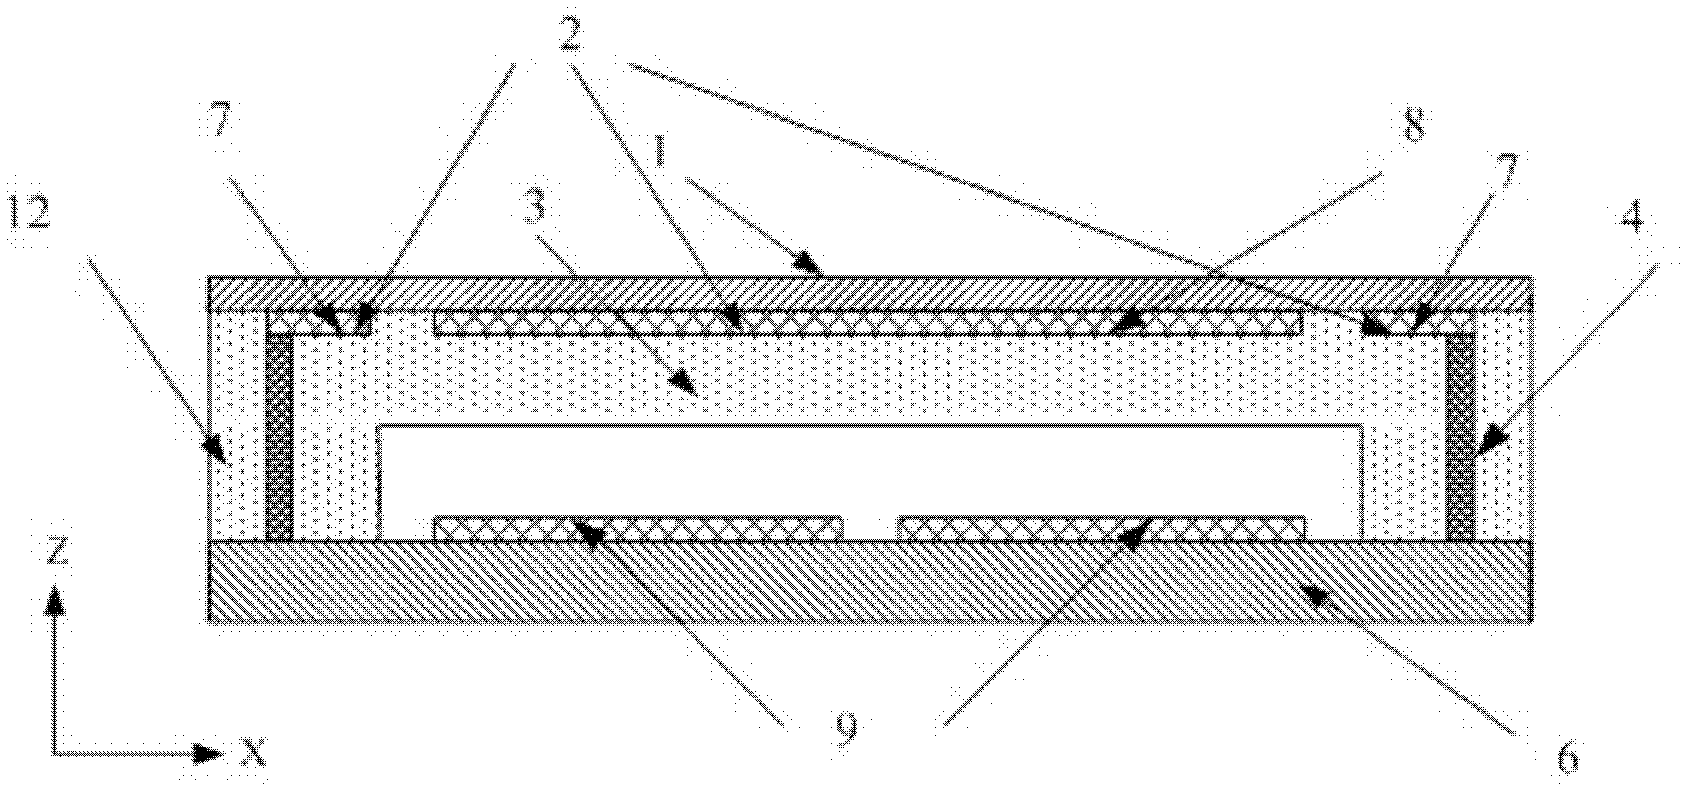 Three-dimensional fluid stress sensor based on flexible MEMS (microelectromechanical system) technology and array thereof